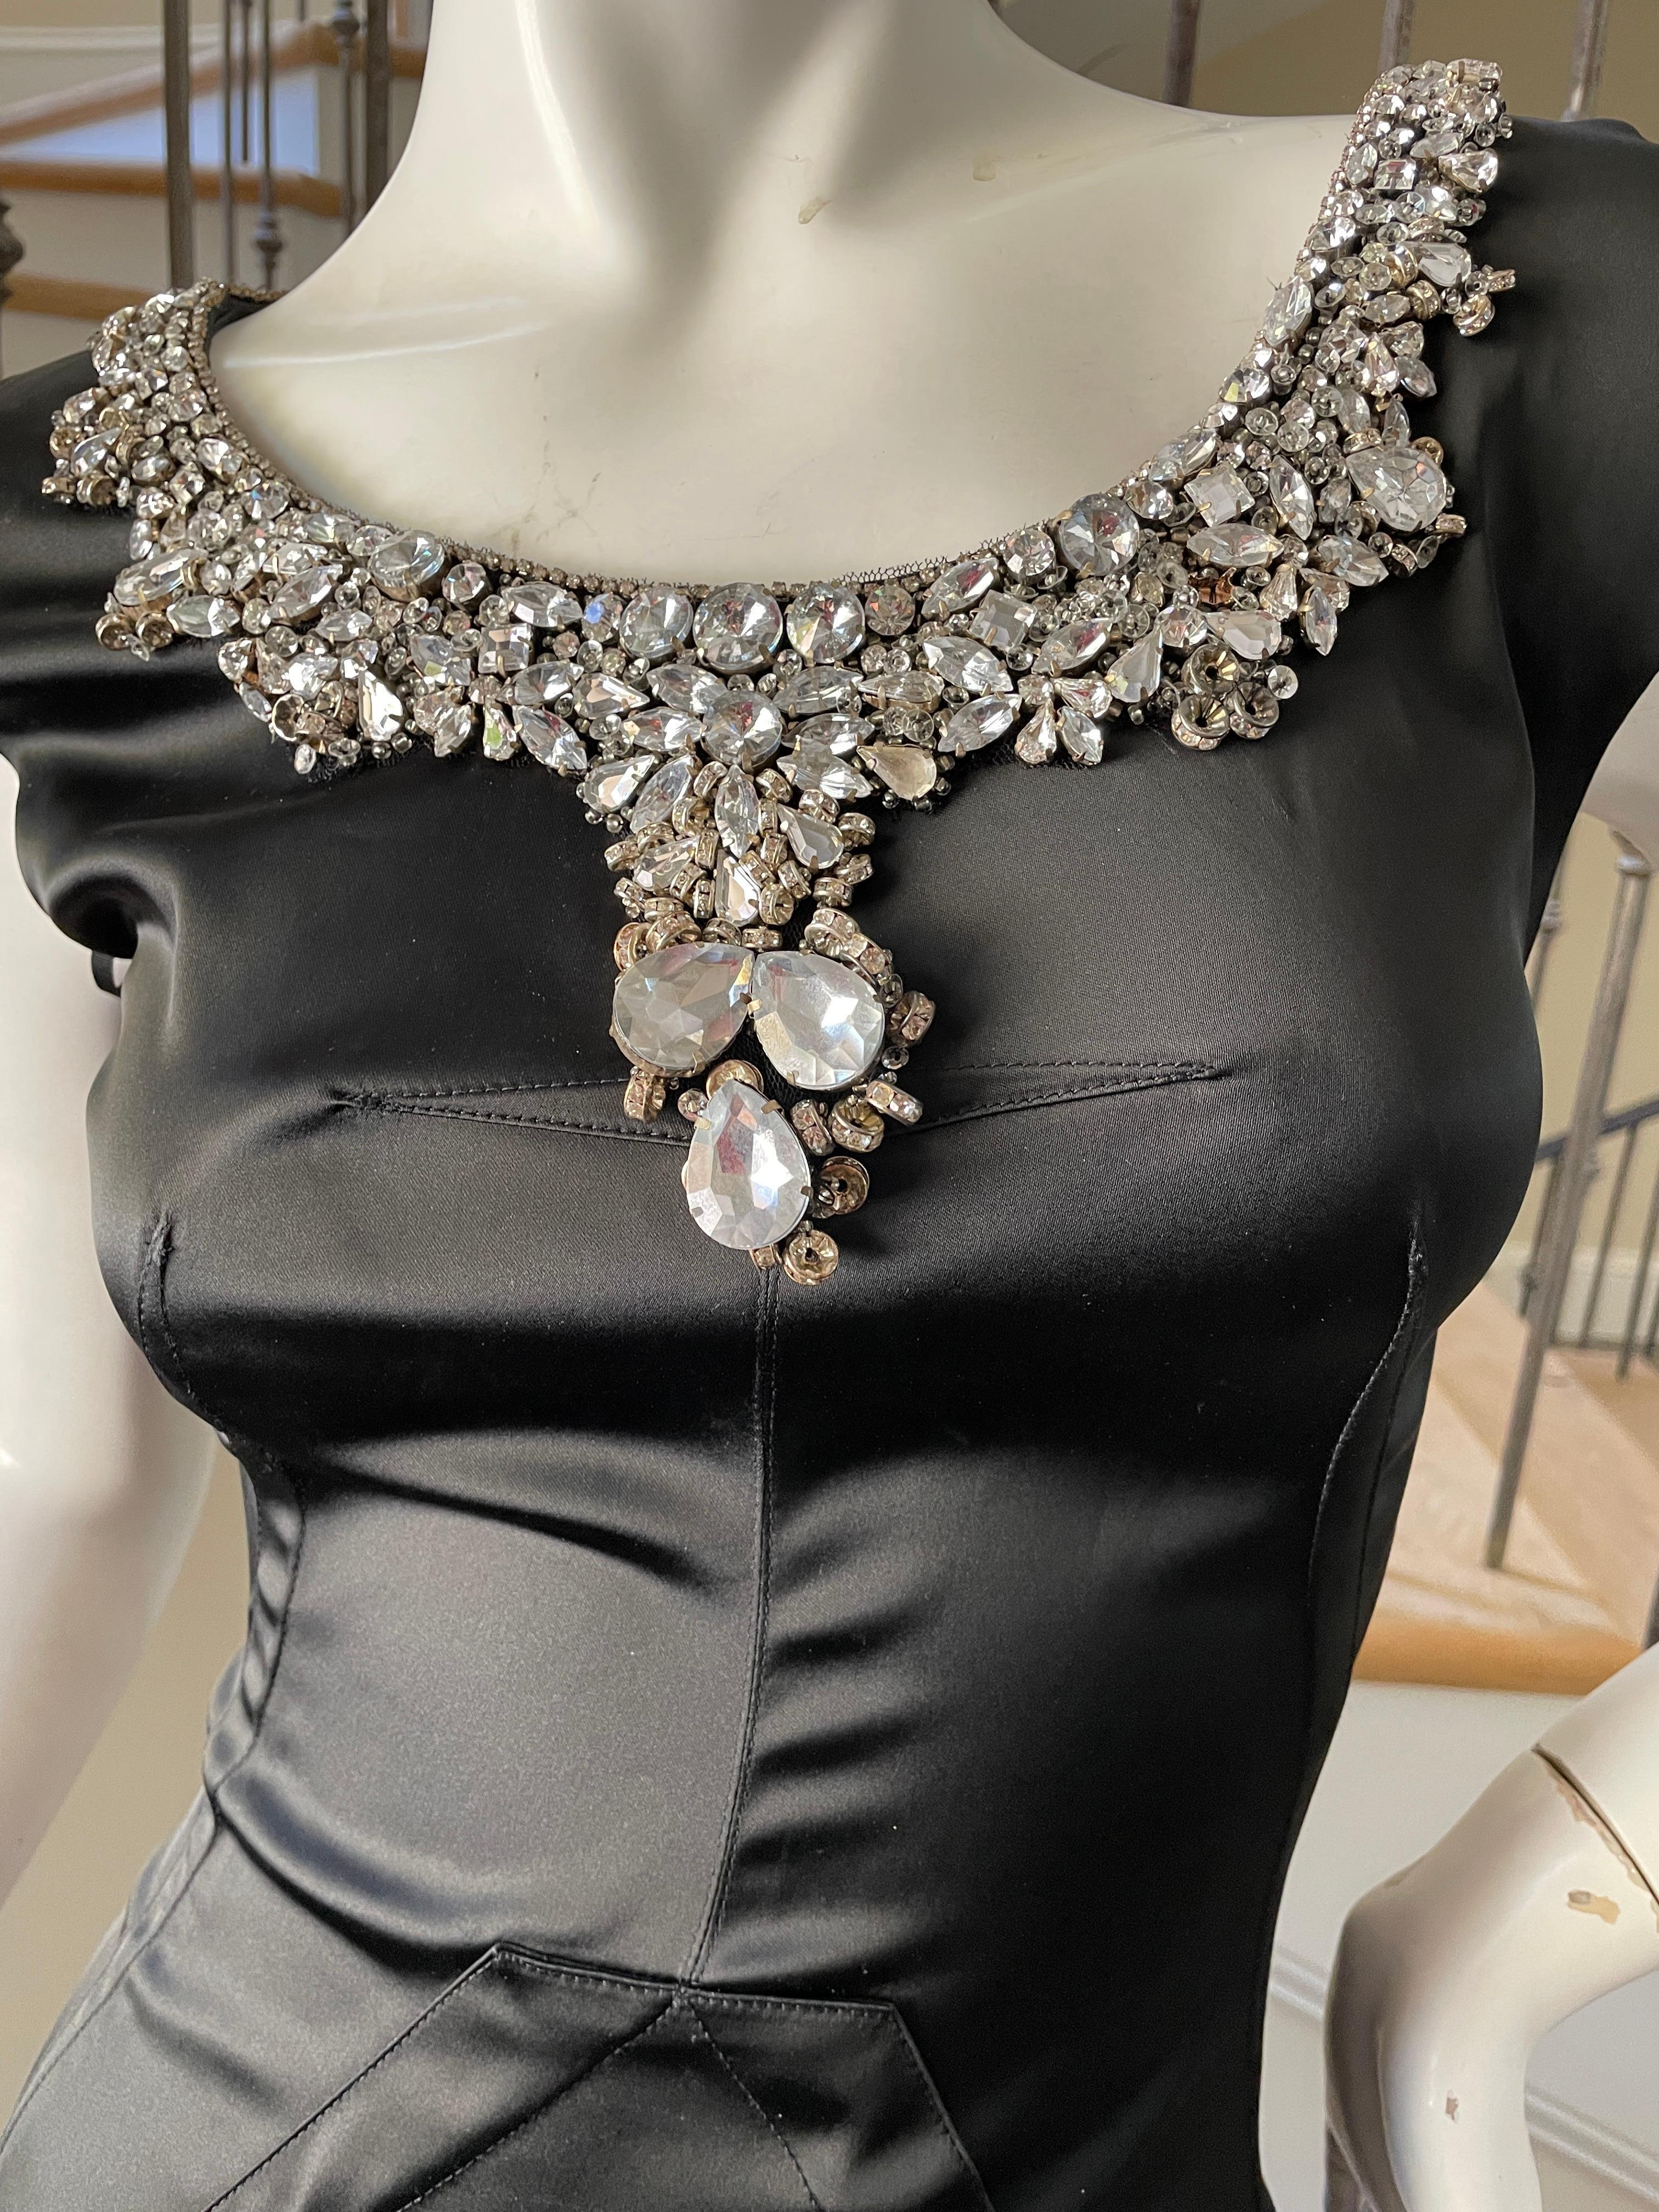 Dolce & Gabbana for D&G Vintage Black Cocktail Dress w Gobsmacking Jewel Collar In Excellent Condition For Sale In Cloverdale, CA